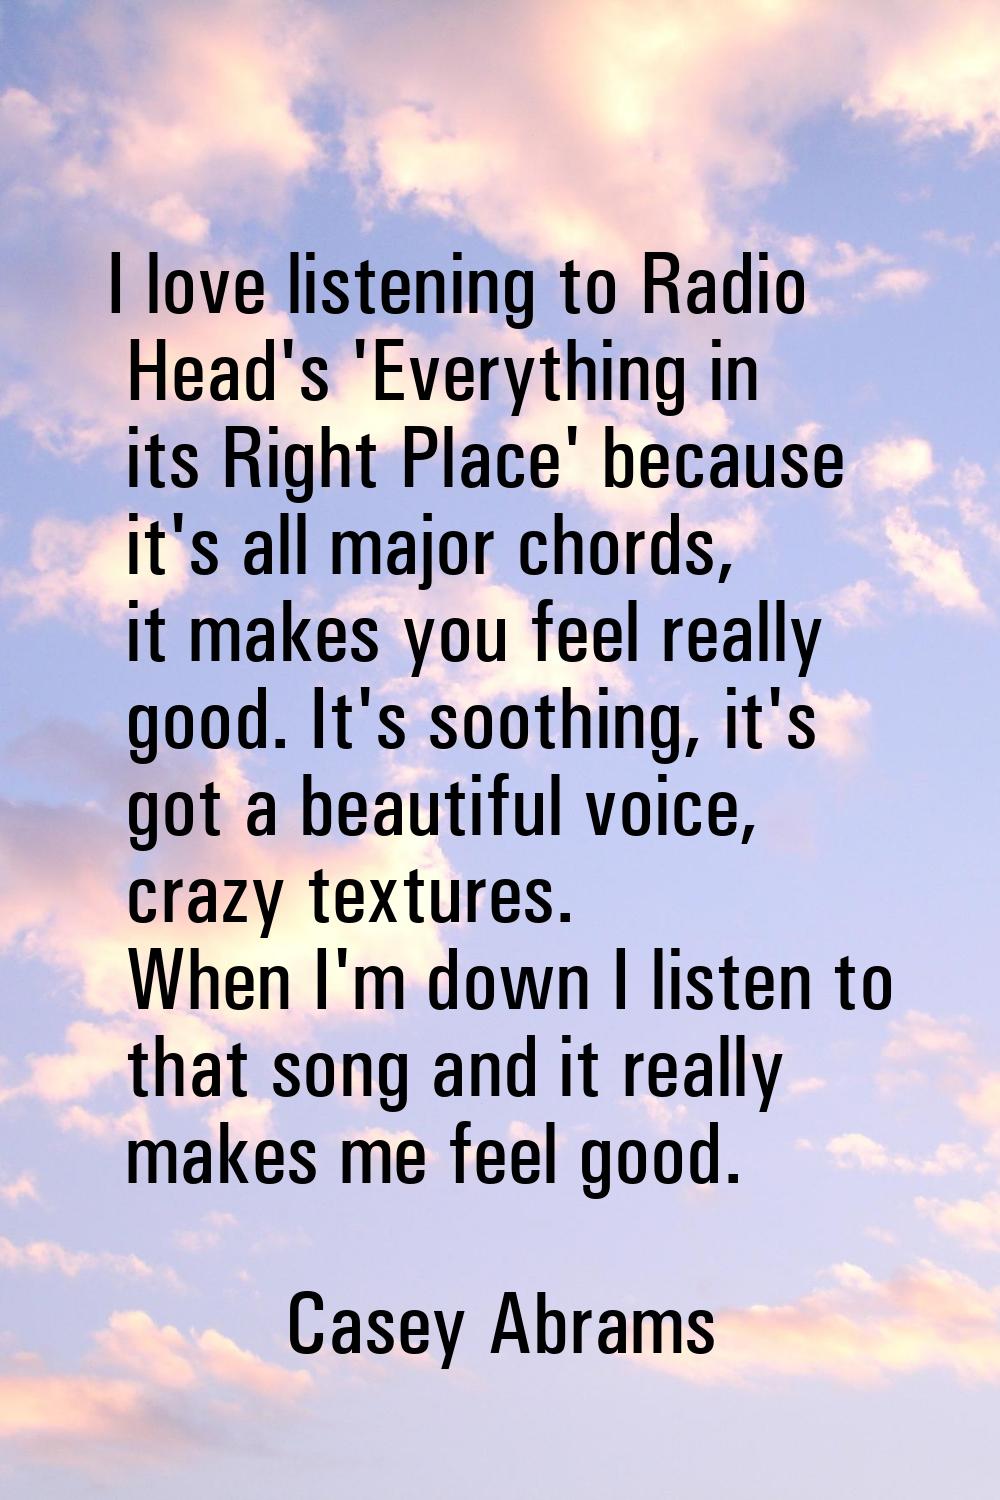 I love listening to Radio Head's 'Everything in its Right Place' because it's all major chords, it 